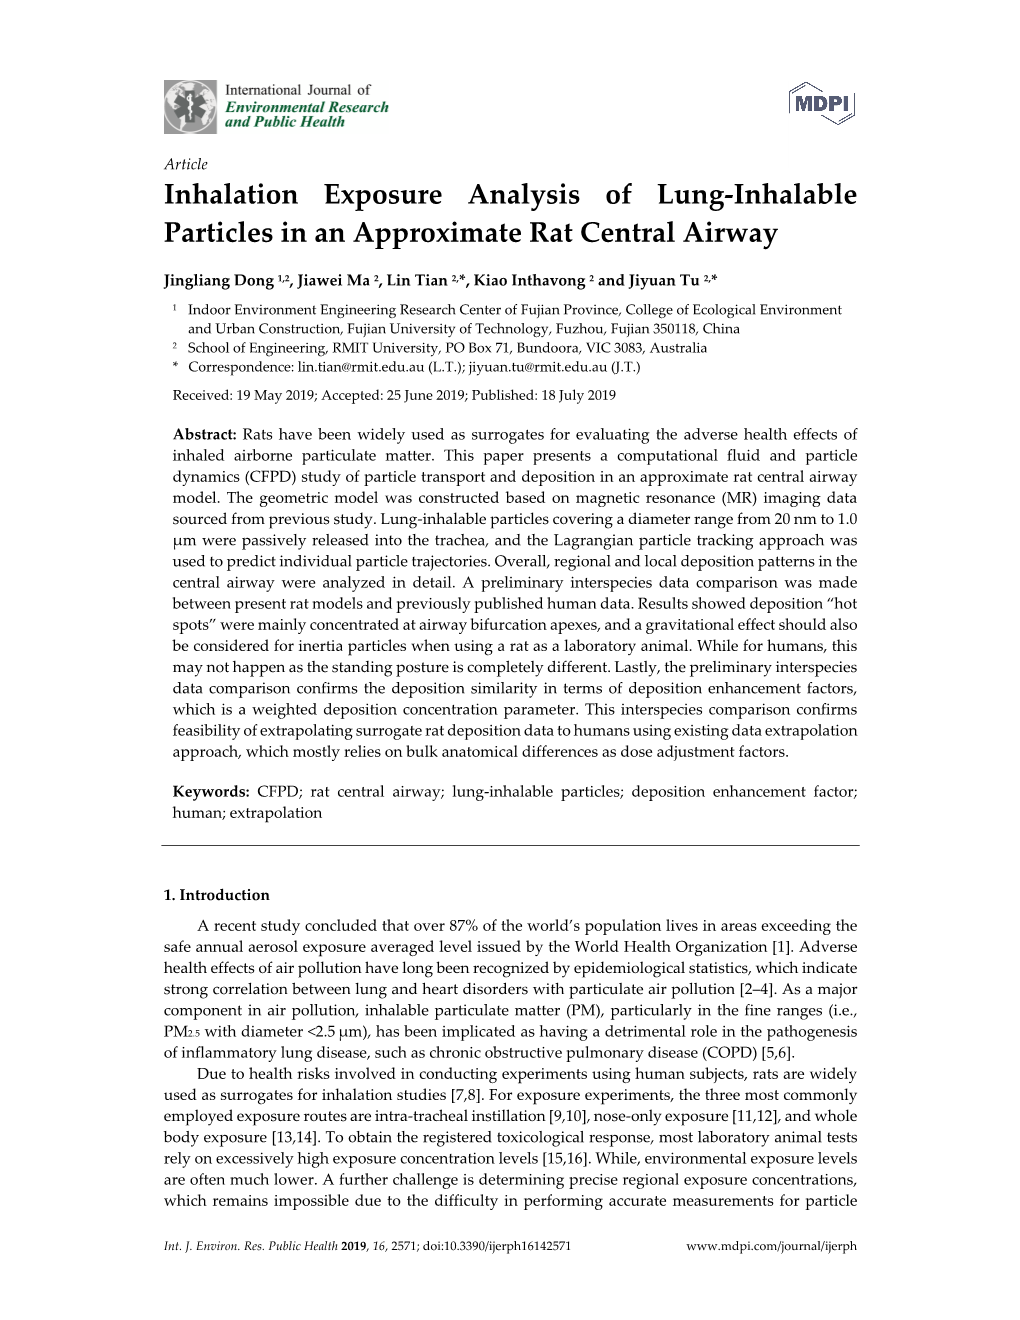 Inhalation Exposure Analysis of Lung-Inhalable Particles in an Approximate Rat Central Airway